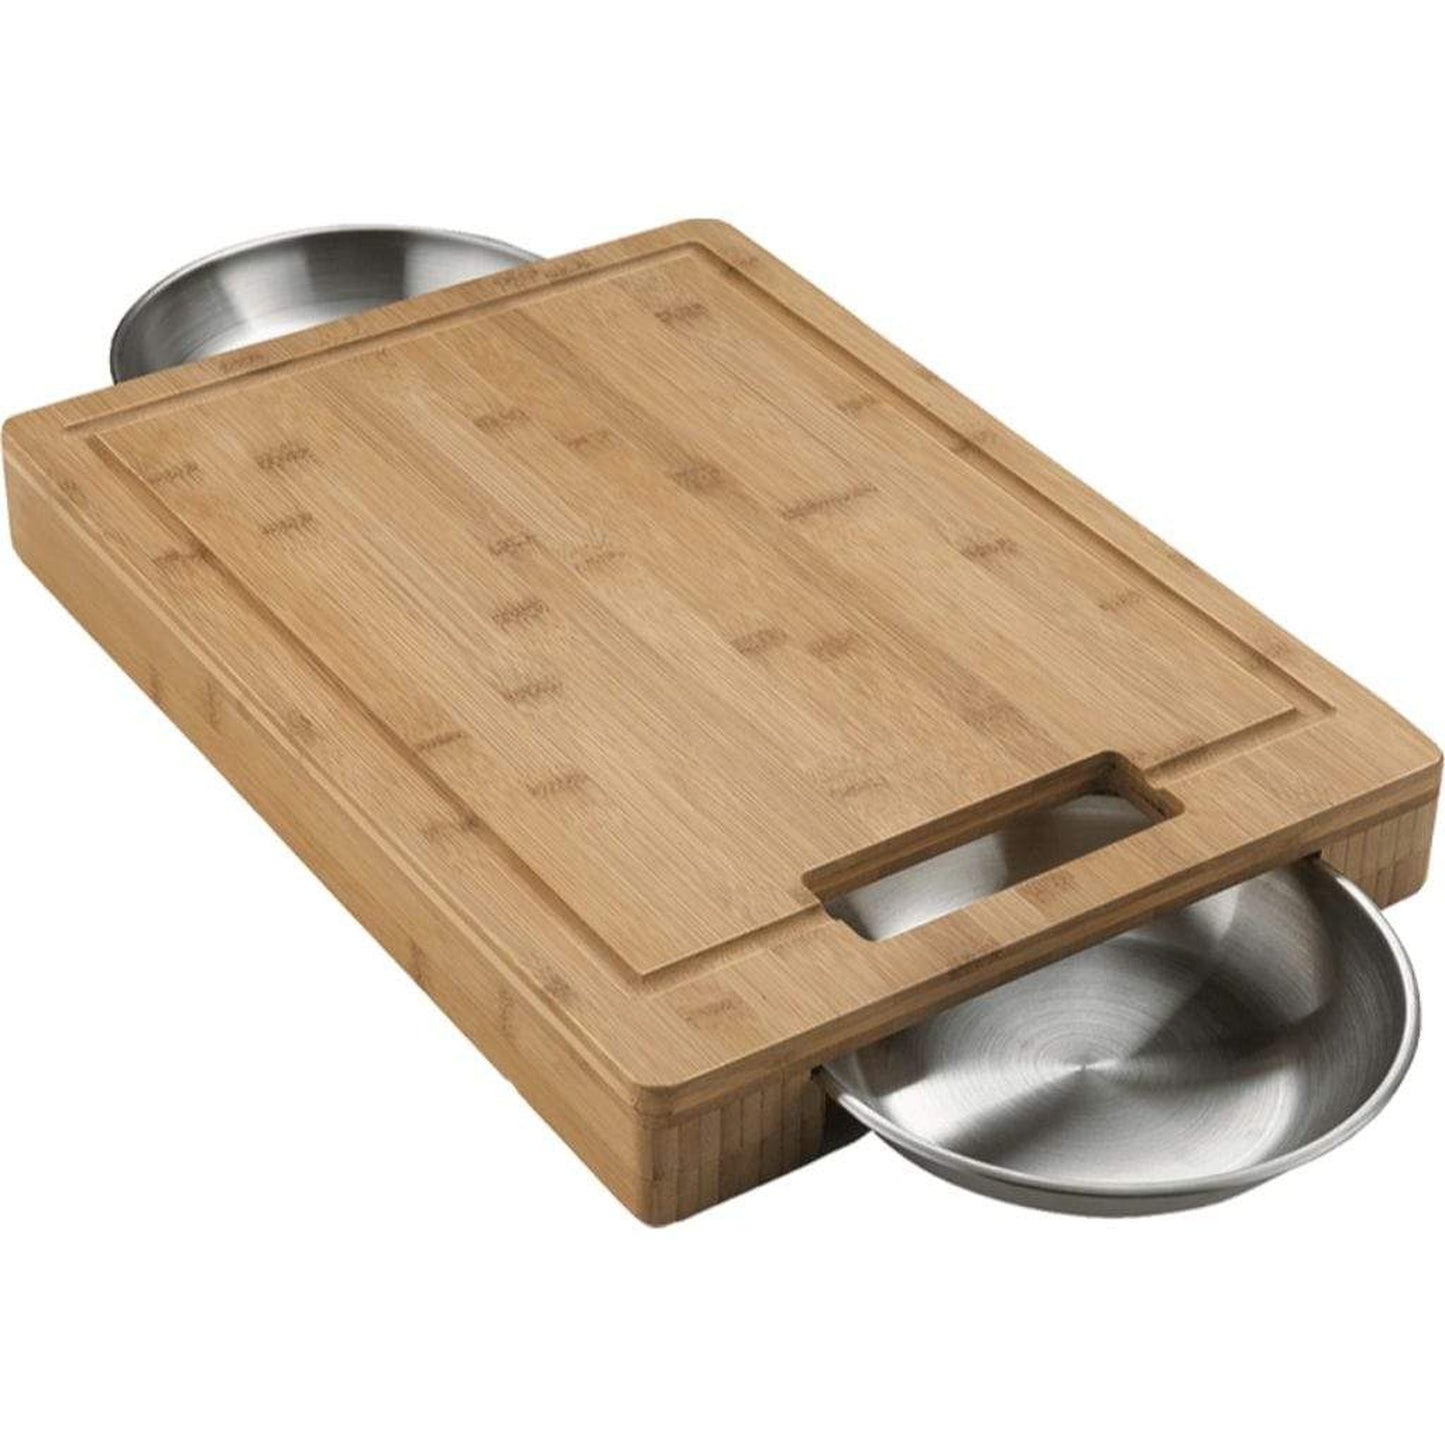 Napoleon 70012 PRO Cutting Board with Stainless Steel Bowls